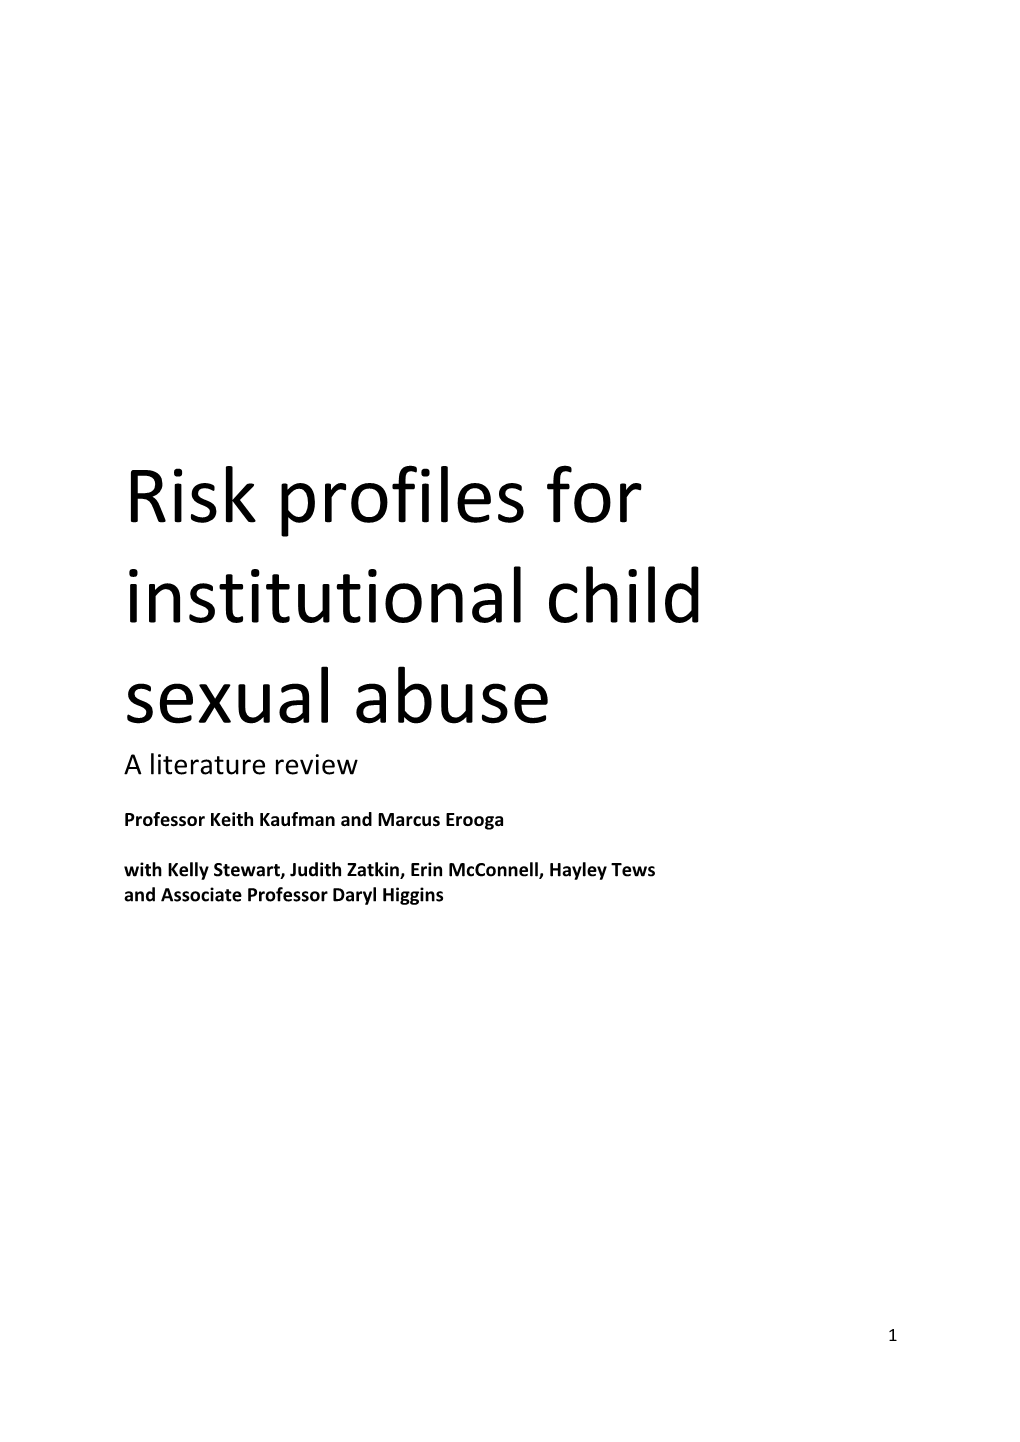 Risk Profiles for Institutional Child Sexual Abuse a Literature Review